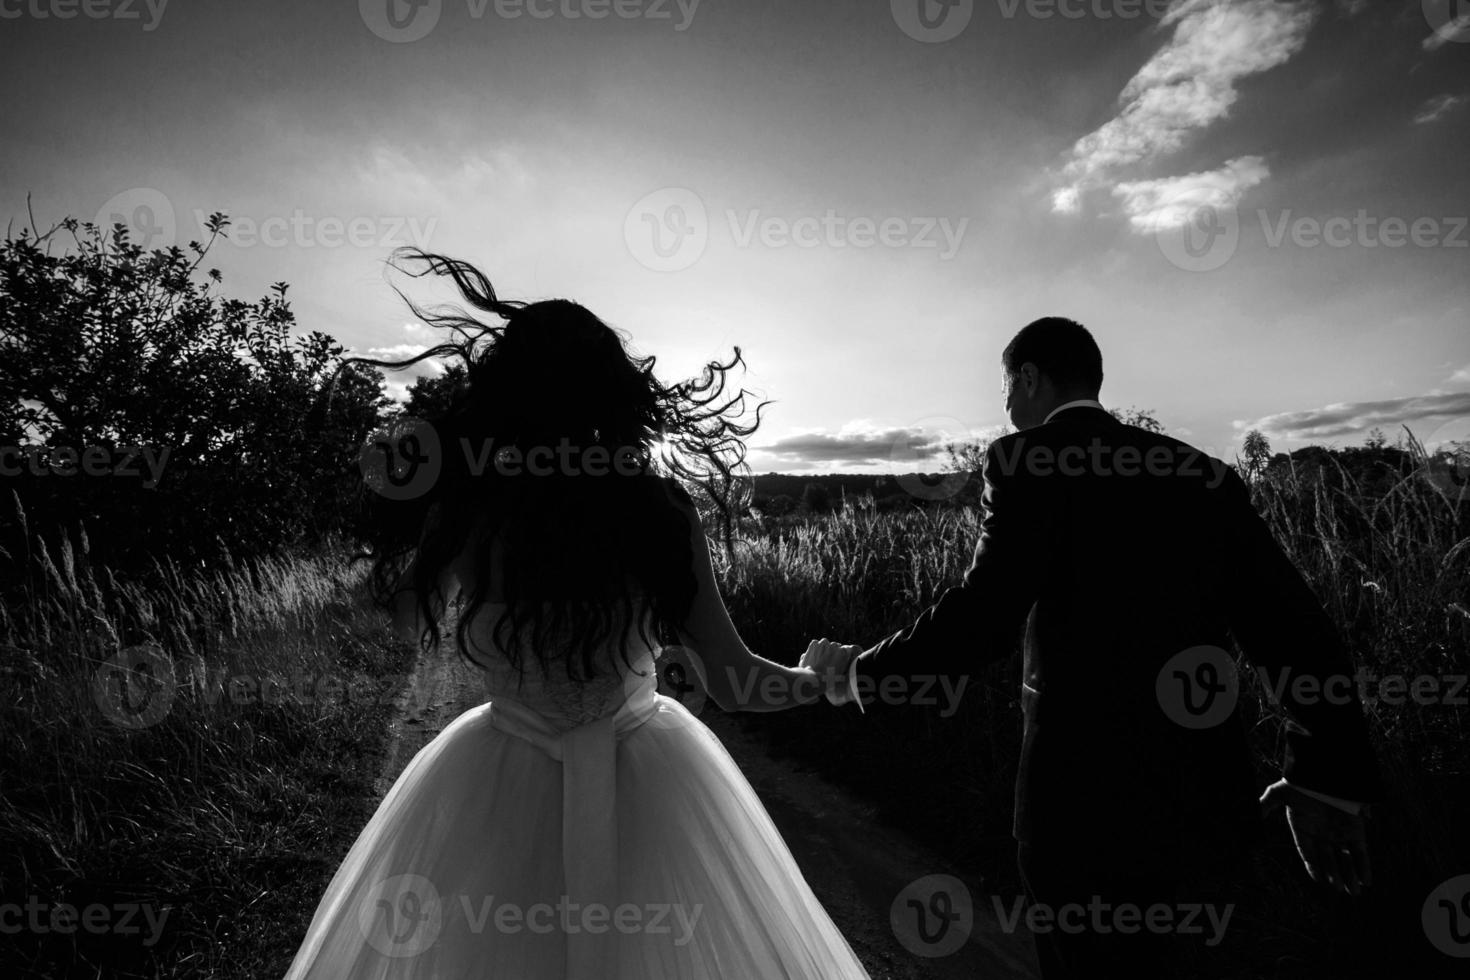 Lovely couple spends time in the field photo